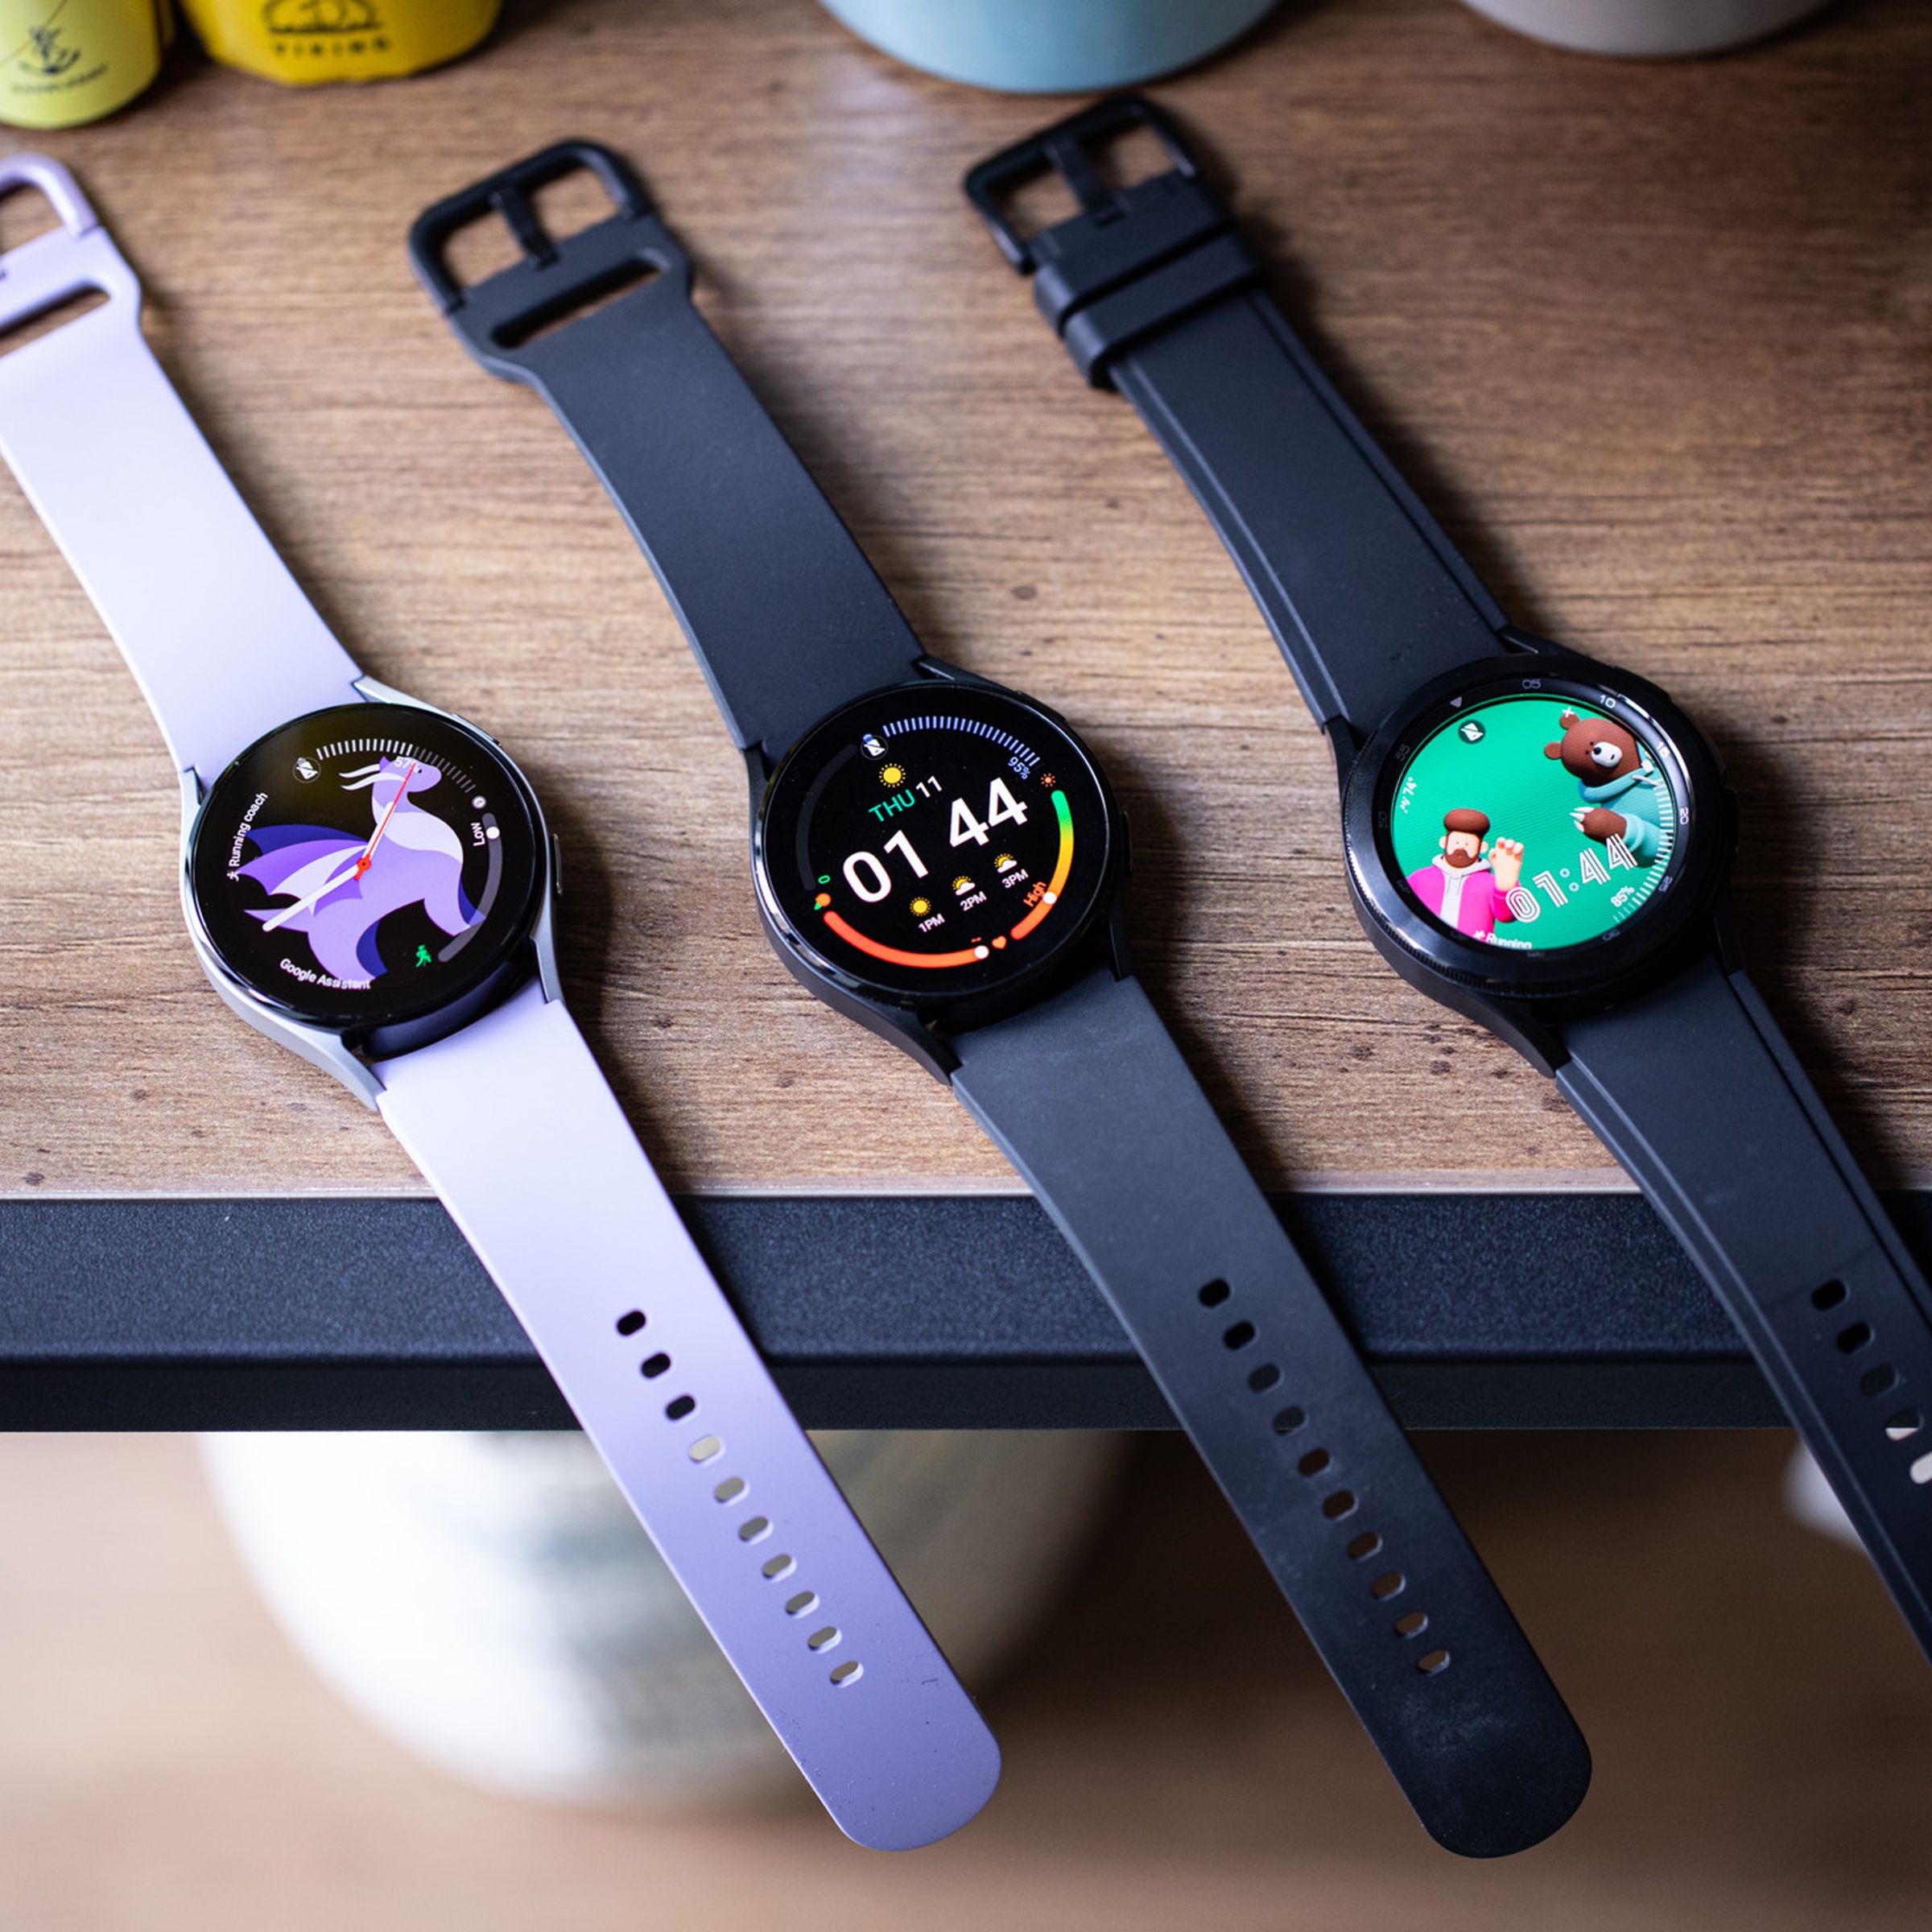 The Galaxy Watch 5, Watch 4, and Watch 4 Classic side by side